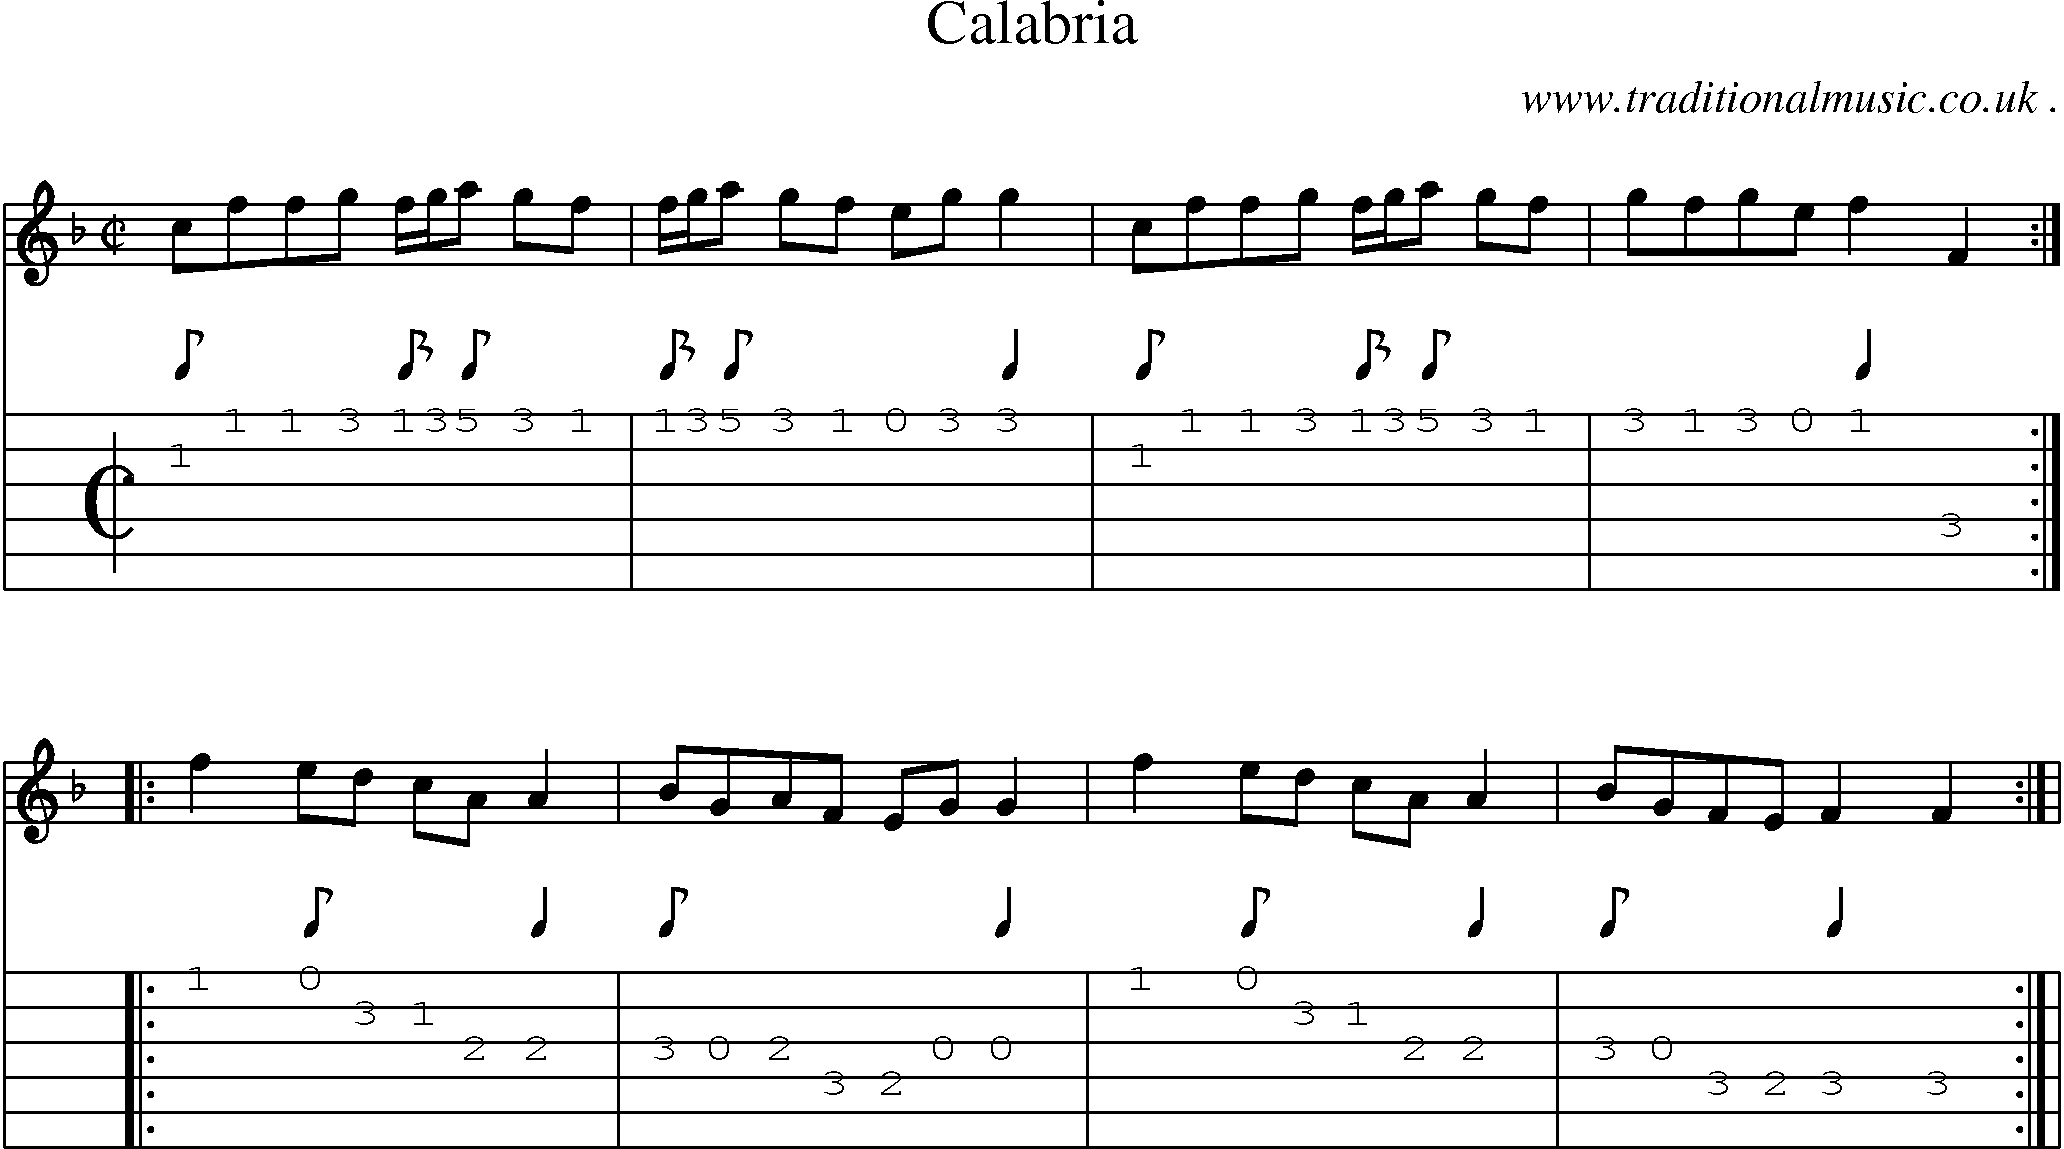 Sheet-Music and Guitar Tabs for Calabria